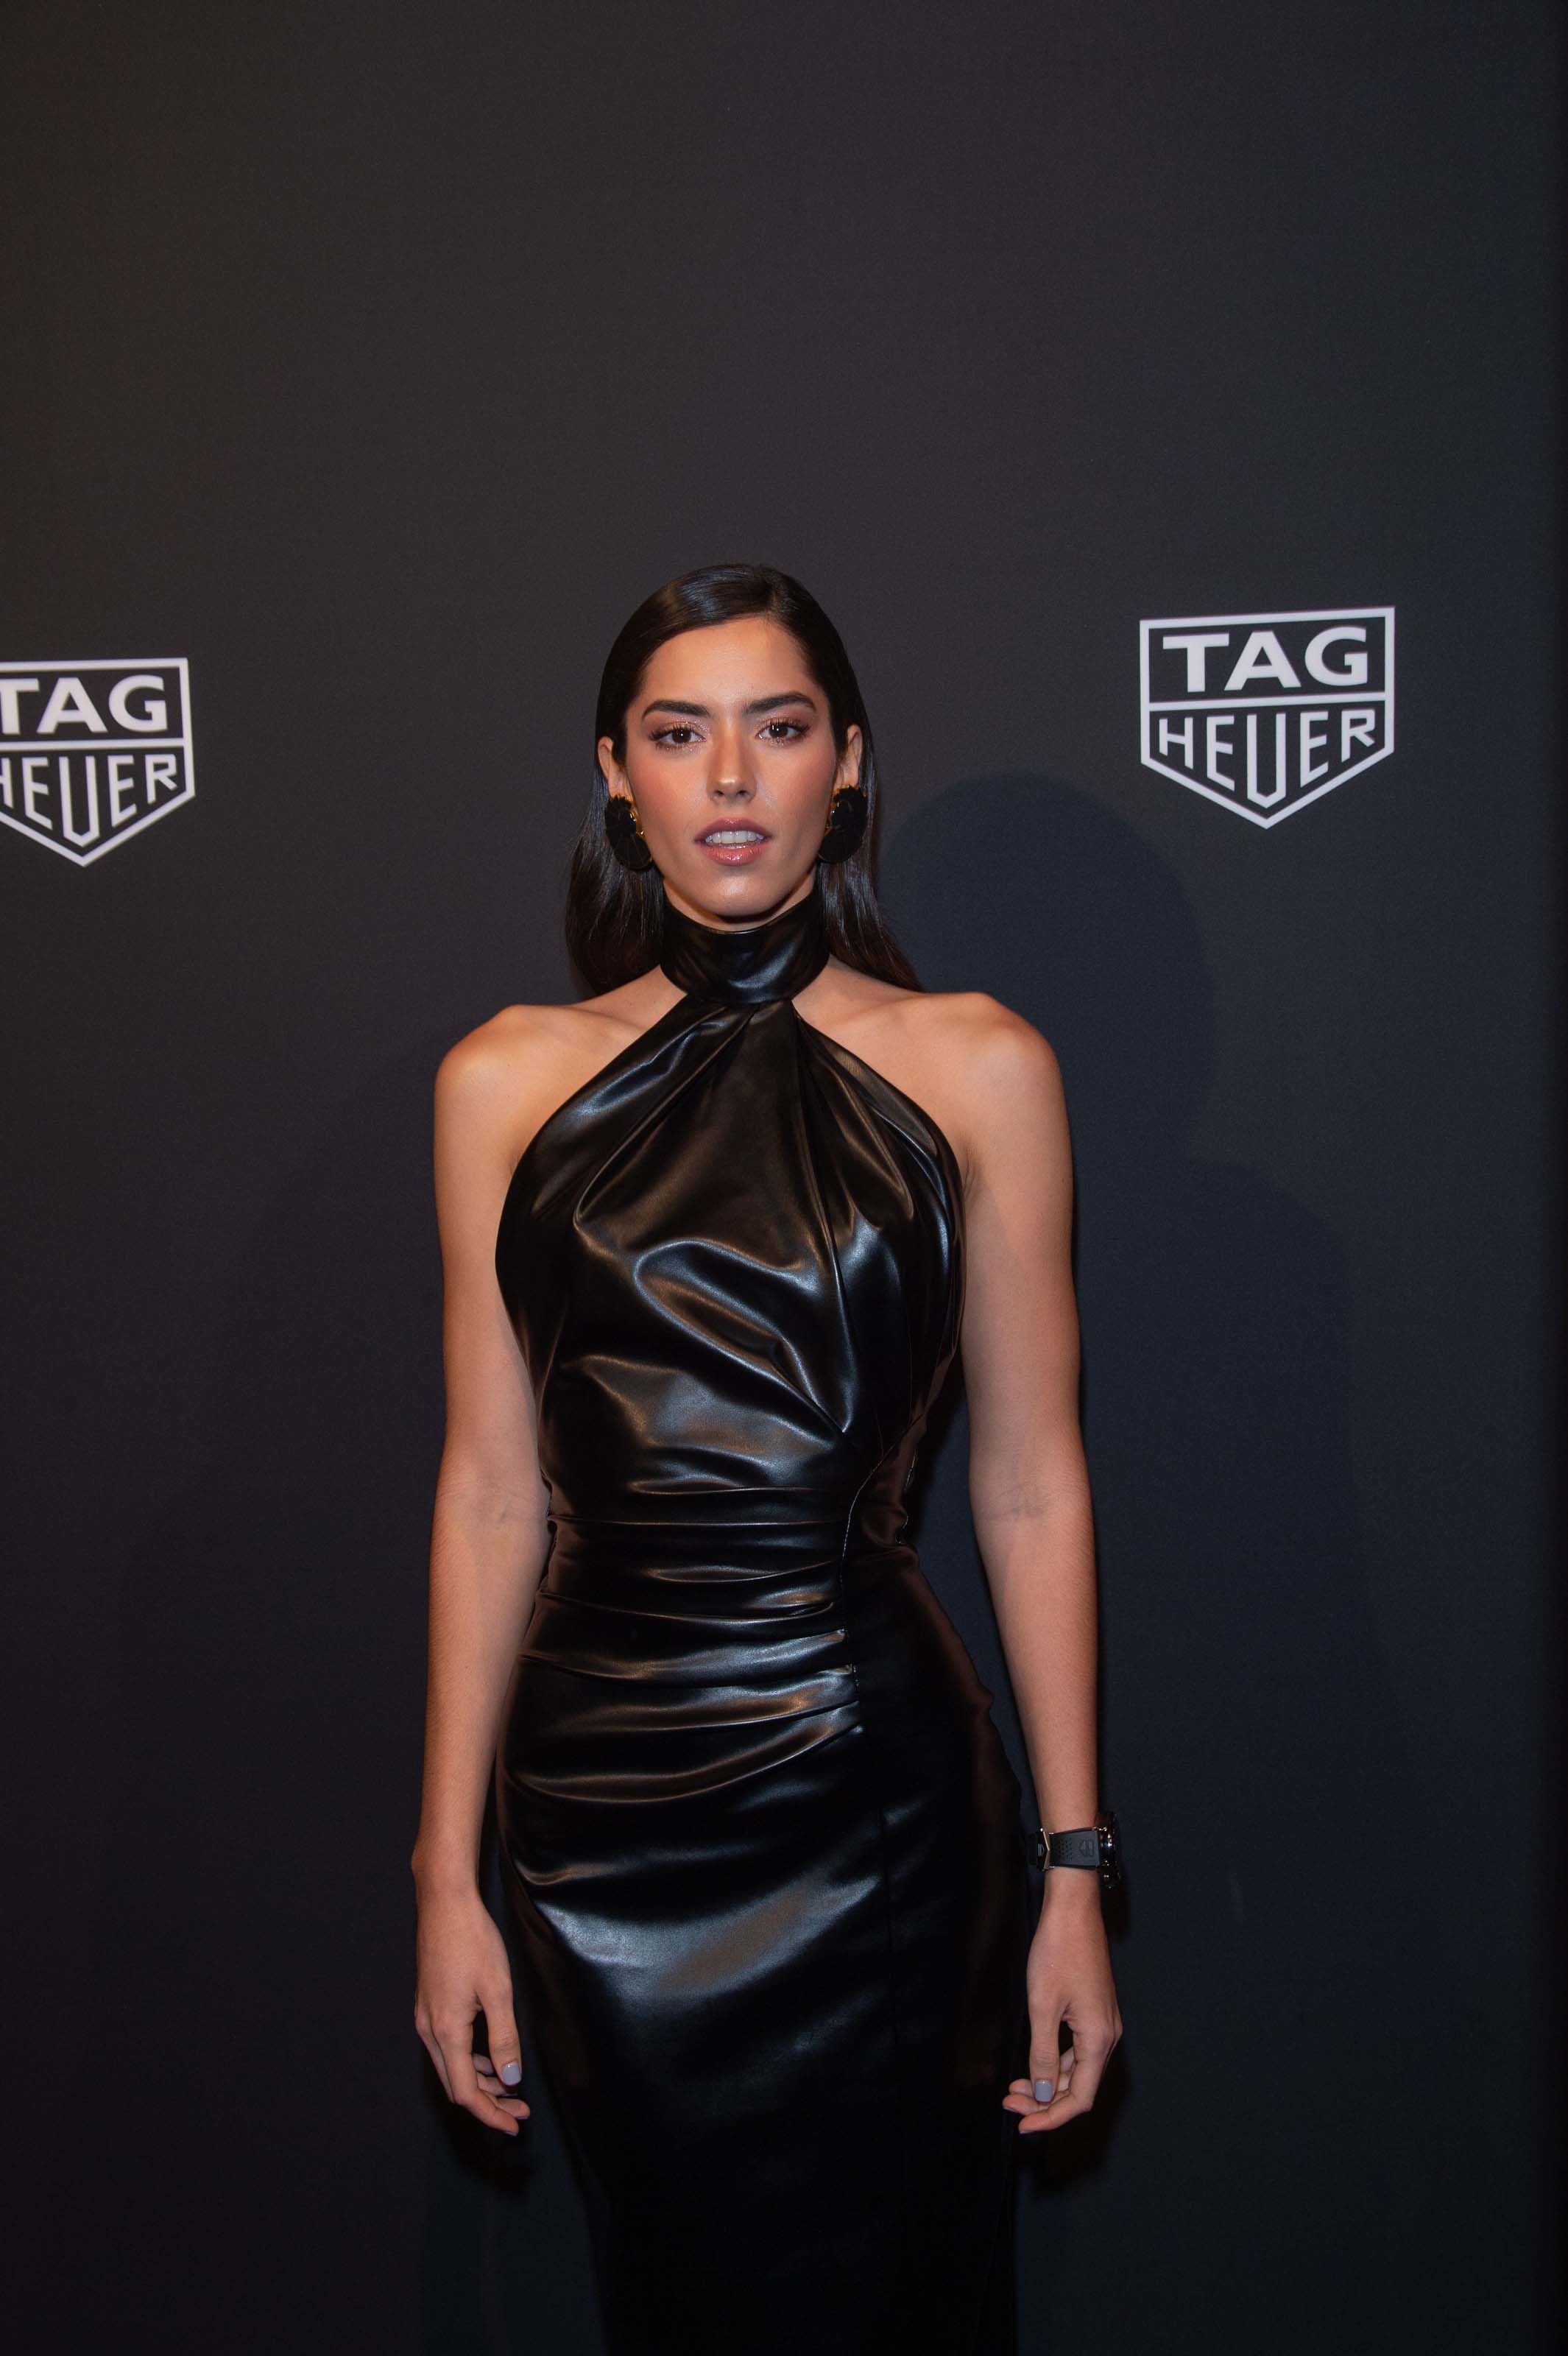 Paulina Vega at Launch of The New Connected Watch